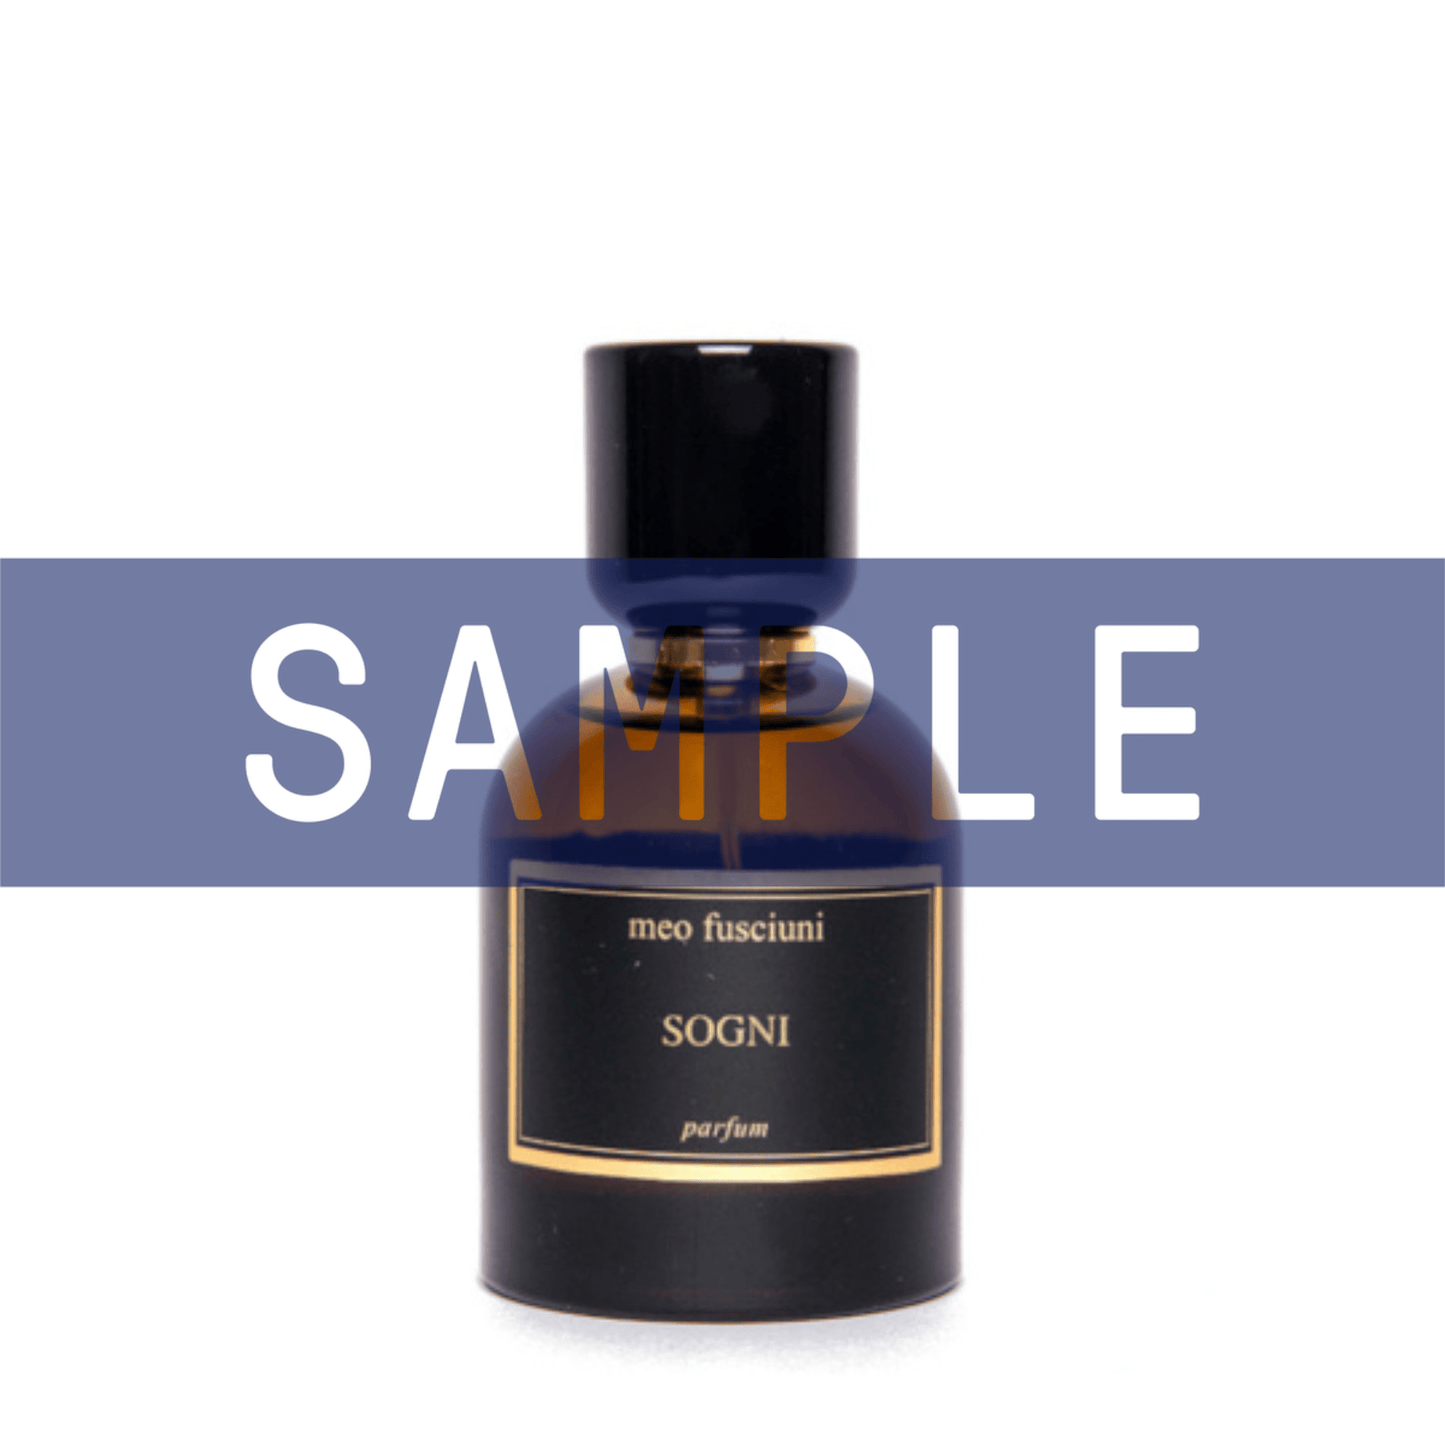 Primary Image of Sample - Sogni EDP